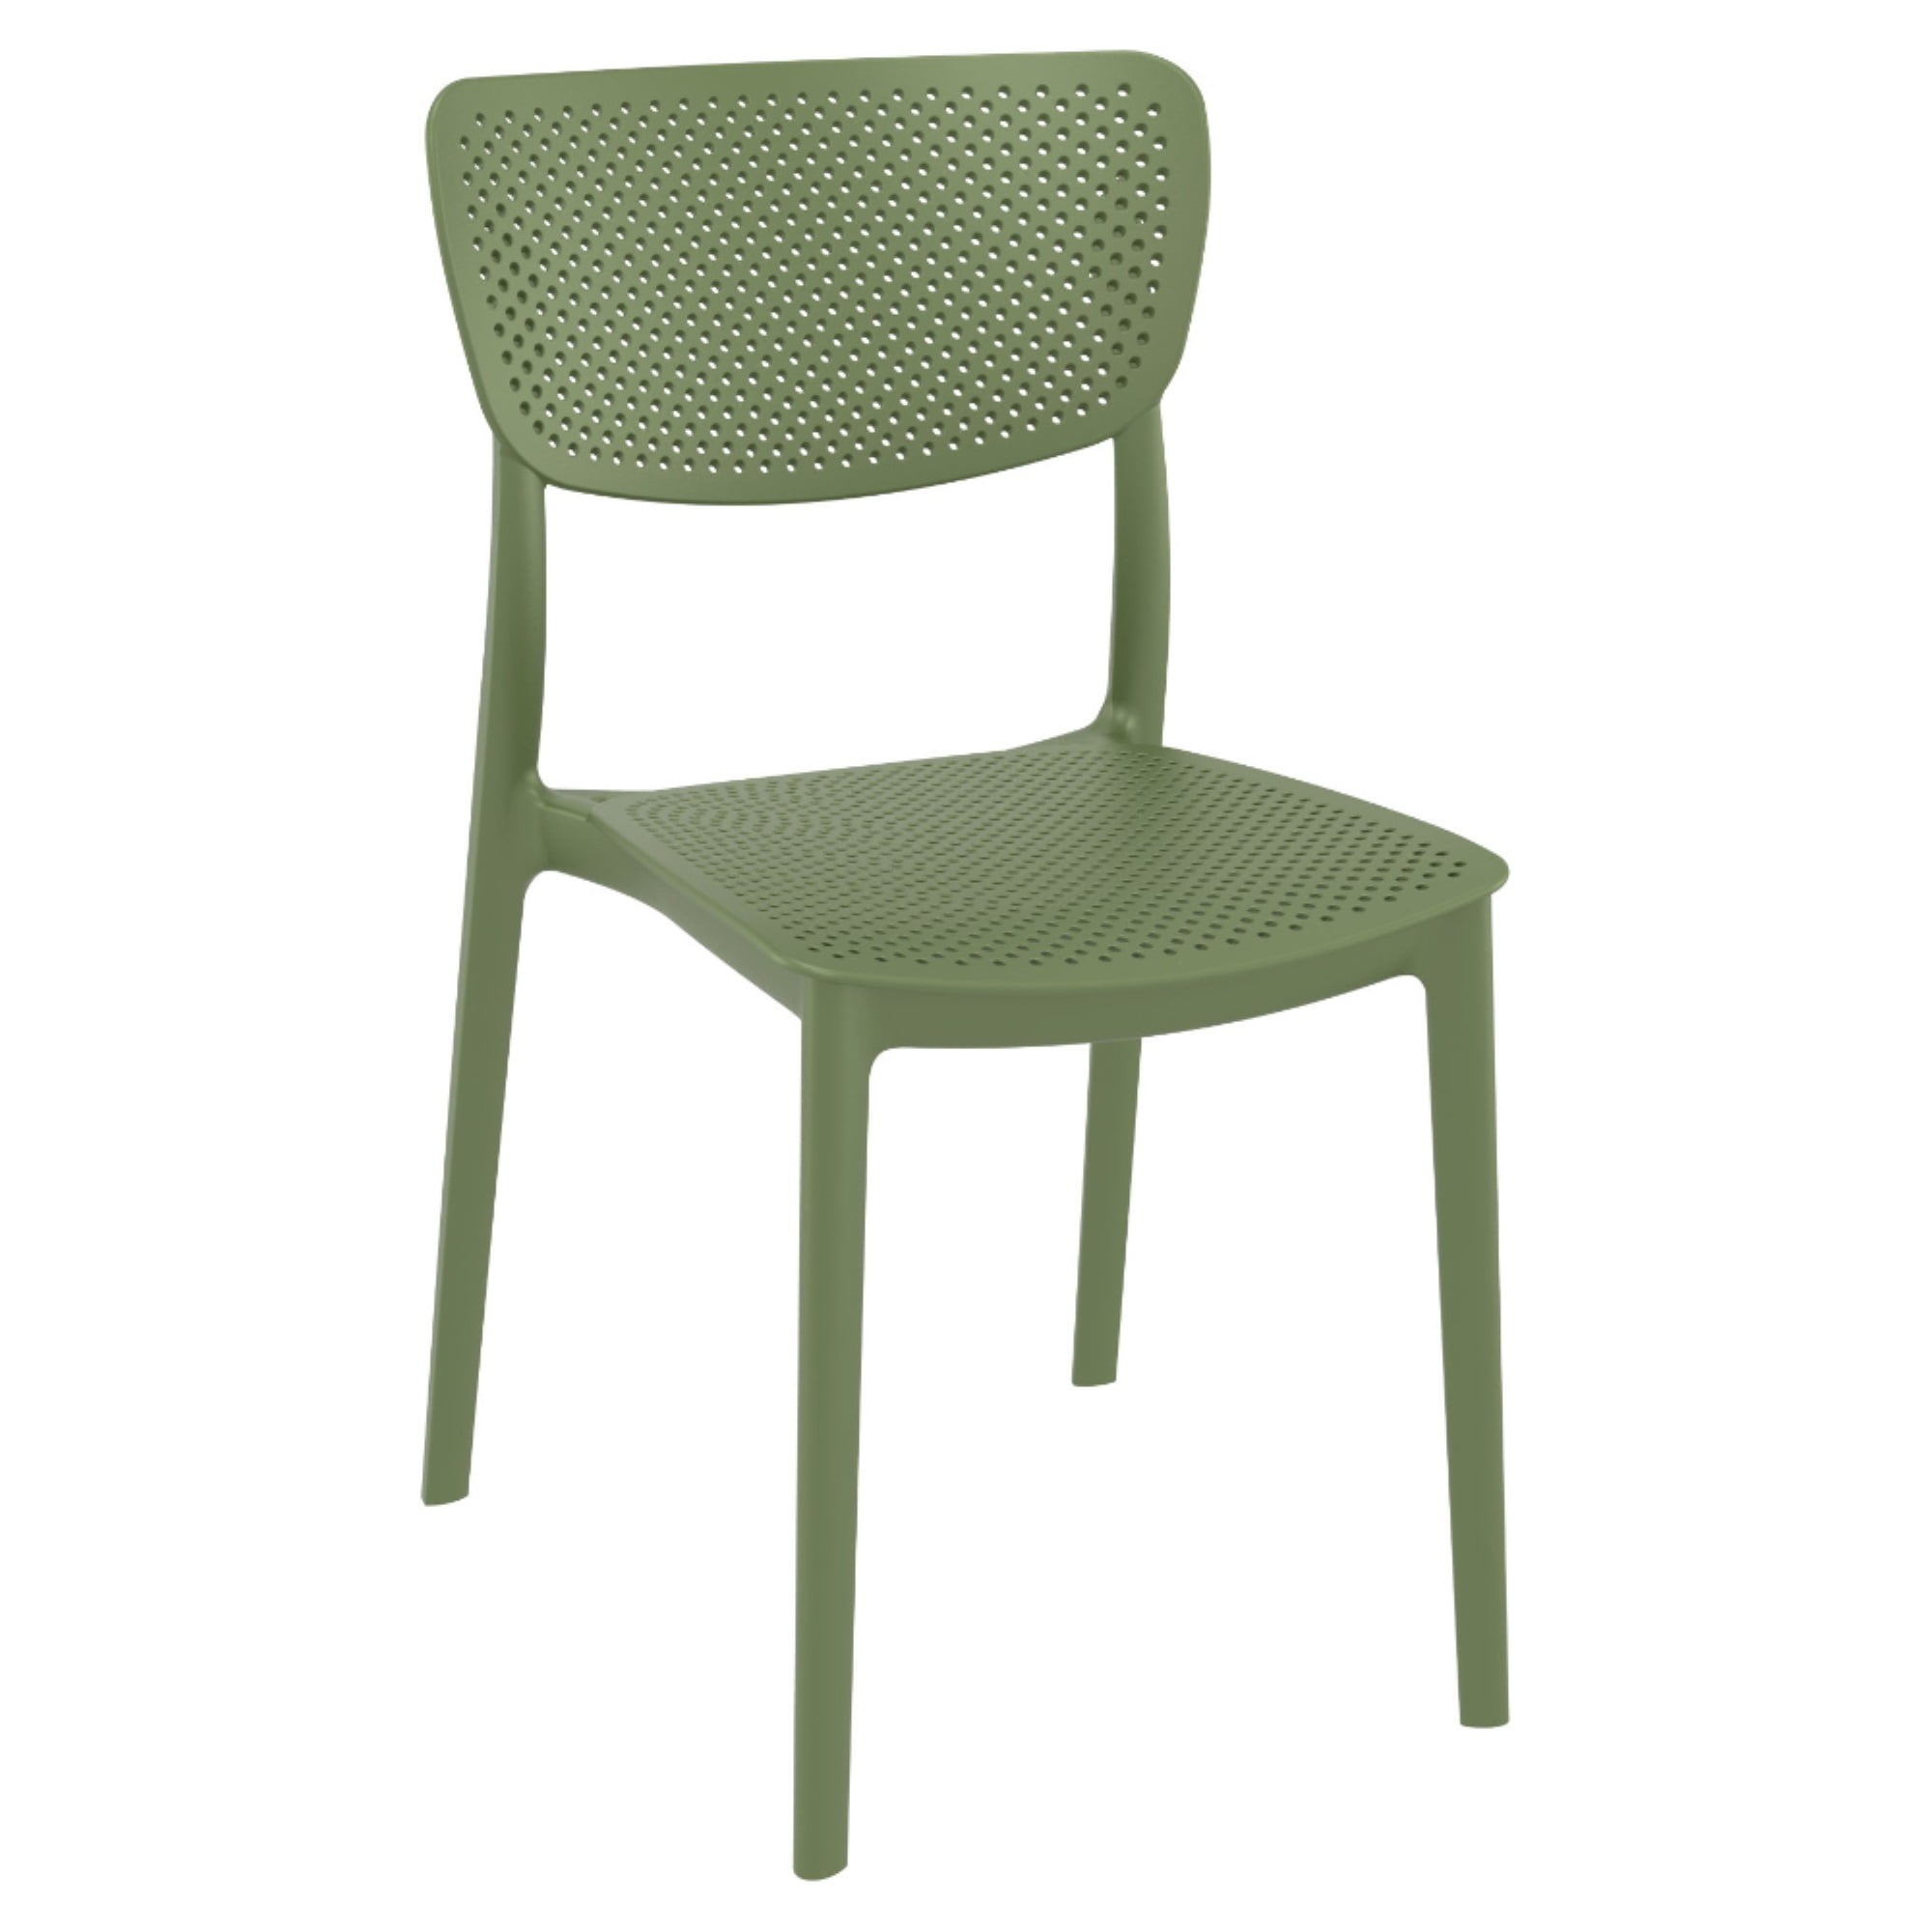 Isp129-olg Lucy Outdoor Dining Chair - Olive Green